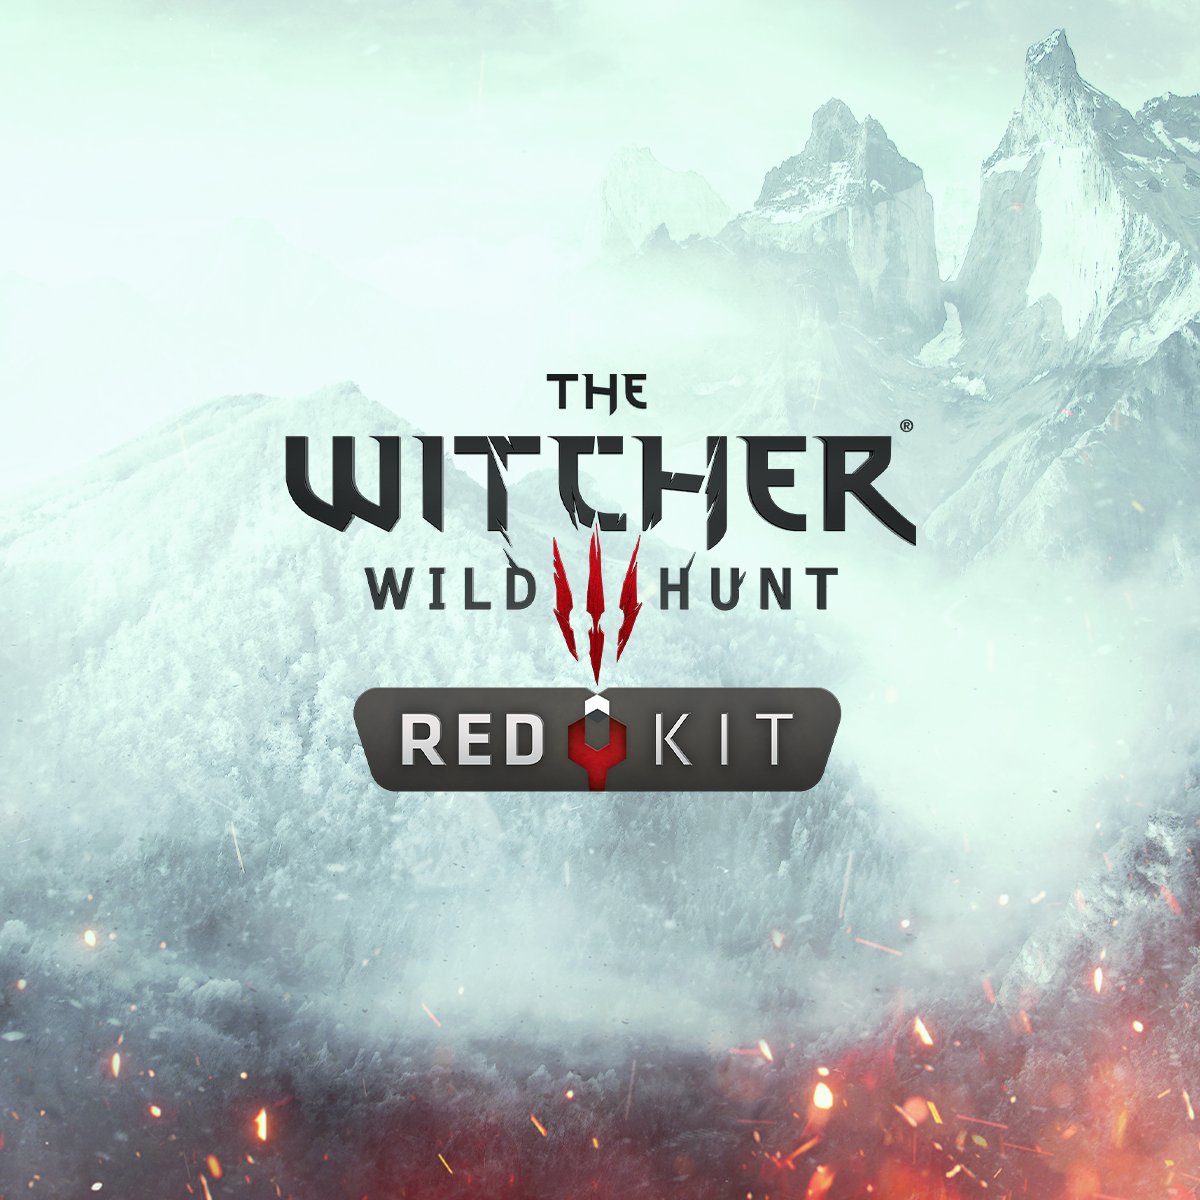 A new realm of modding possibilities is waiting for you! ⚔️ The Witcher 3 REDkit is launching May 21st on GOG: bit.ly/TW3REDkit